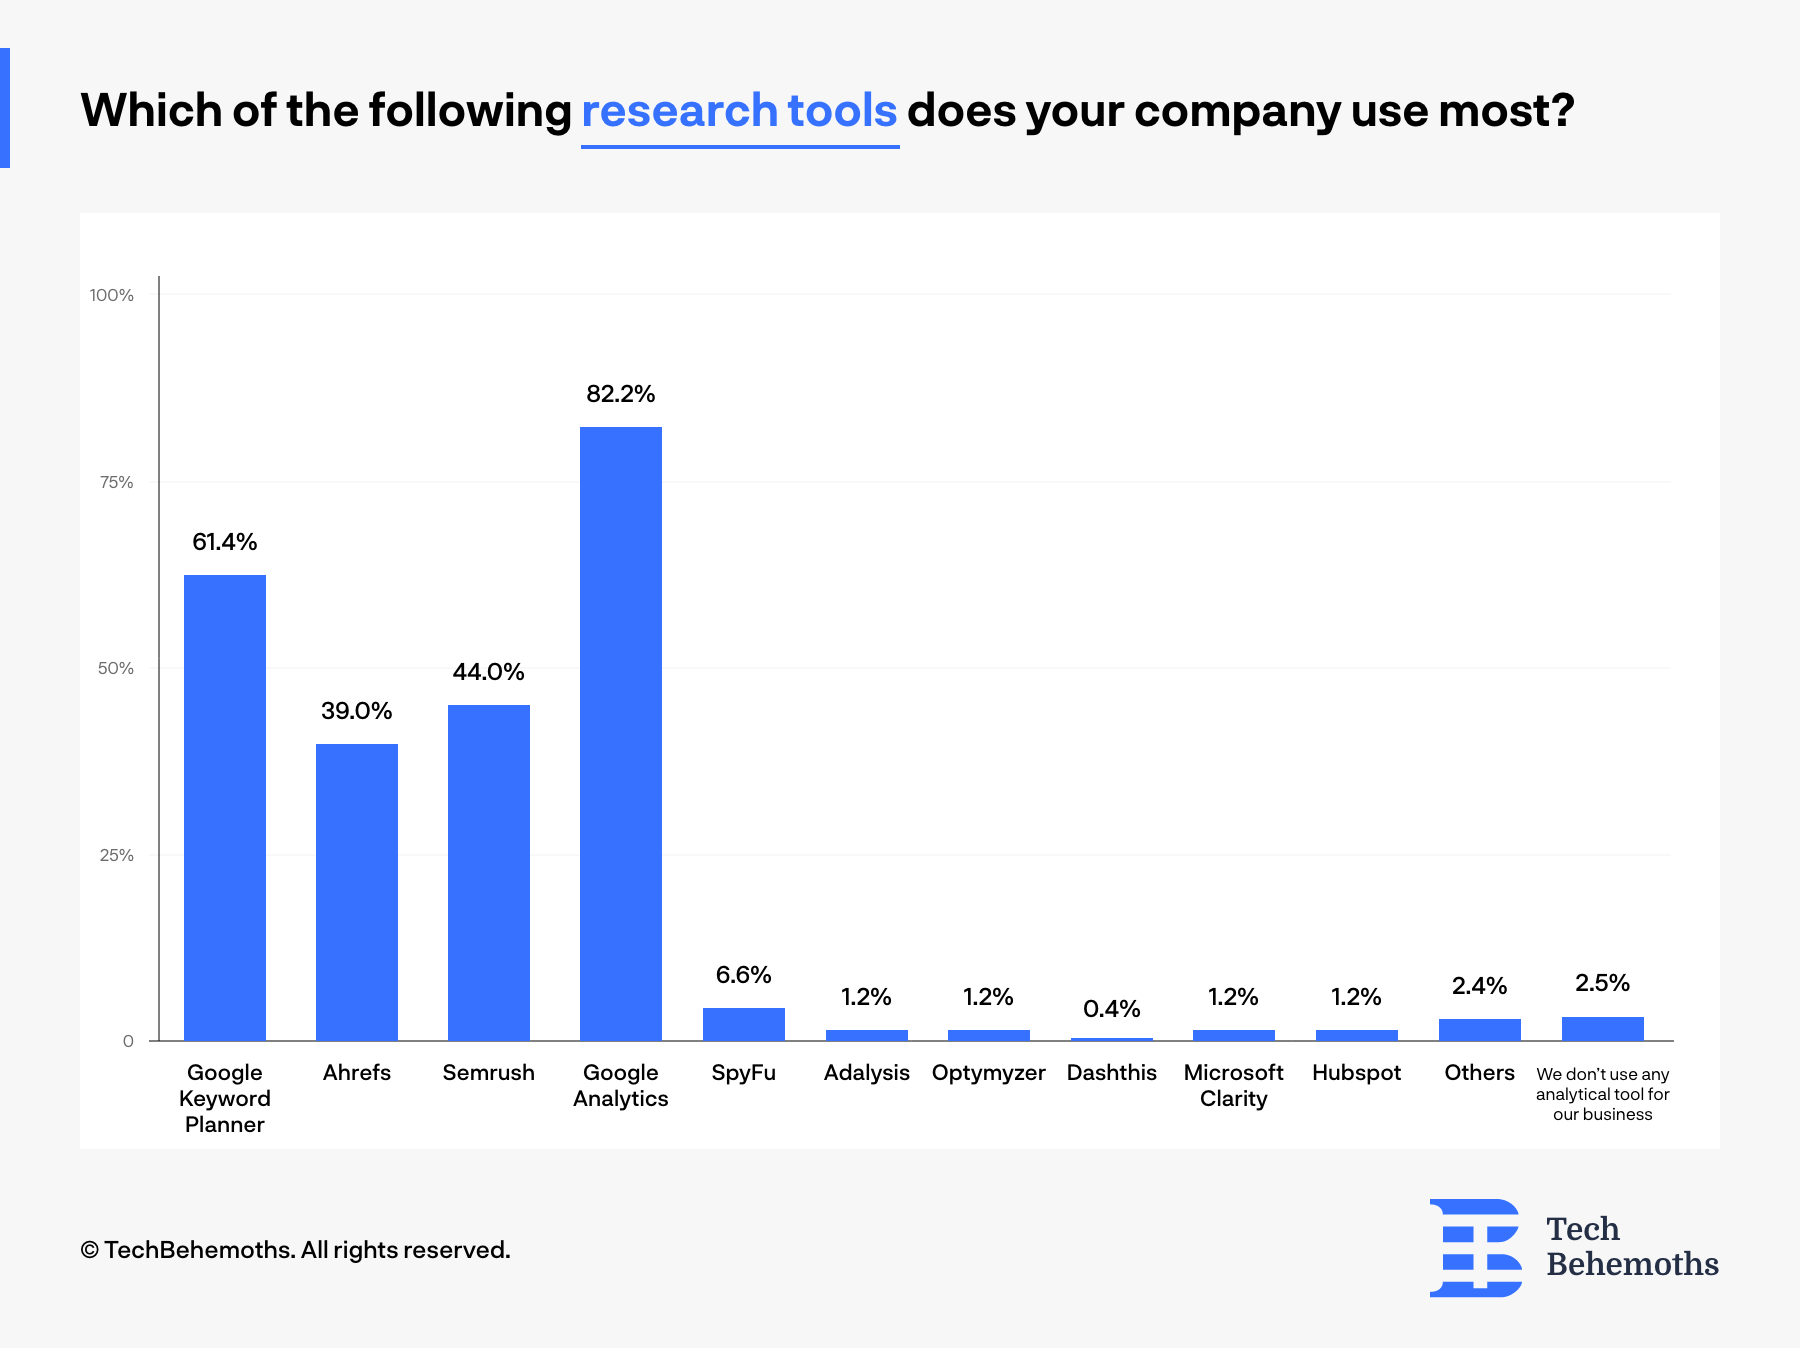 Google Analytics and Google Keyword Planner are top Analytics and research tools used by  IT companies and digital agencies according to survey results